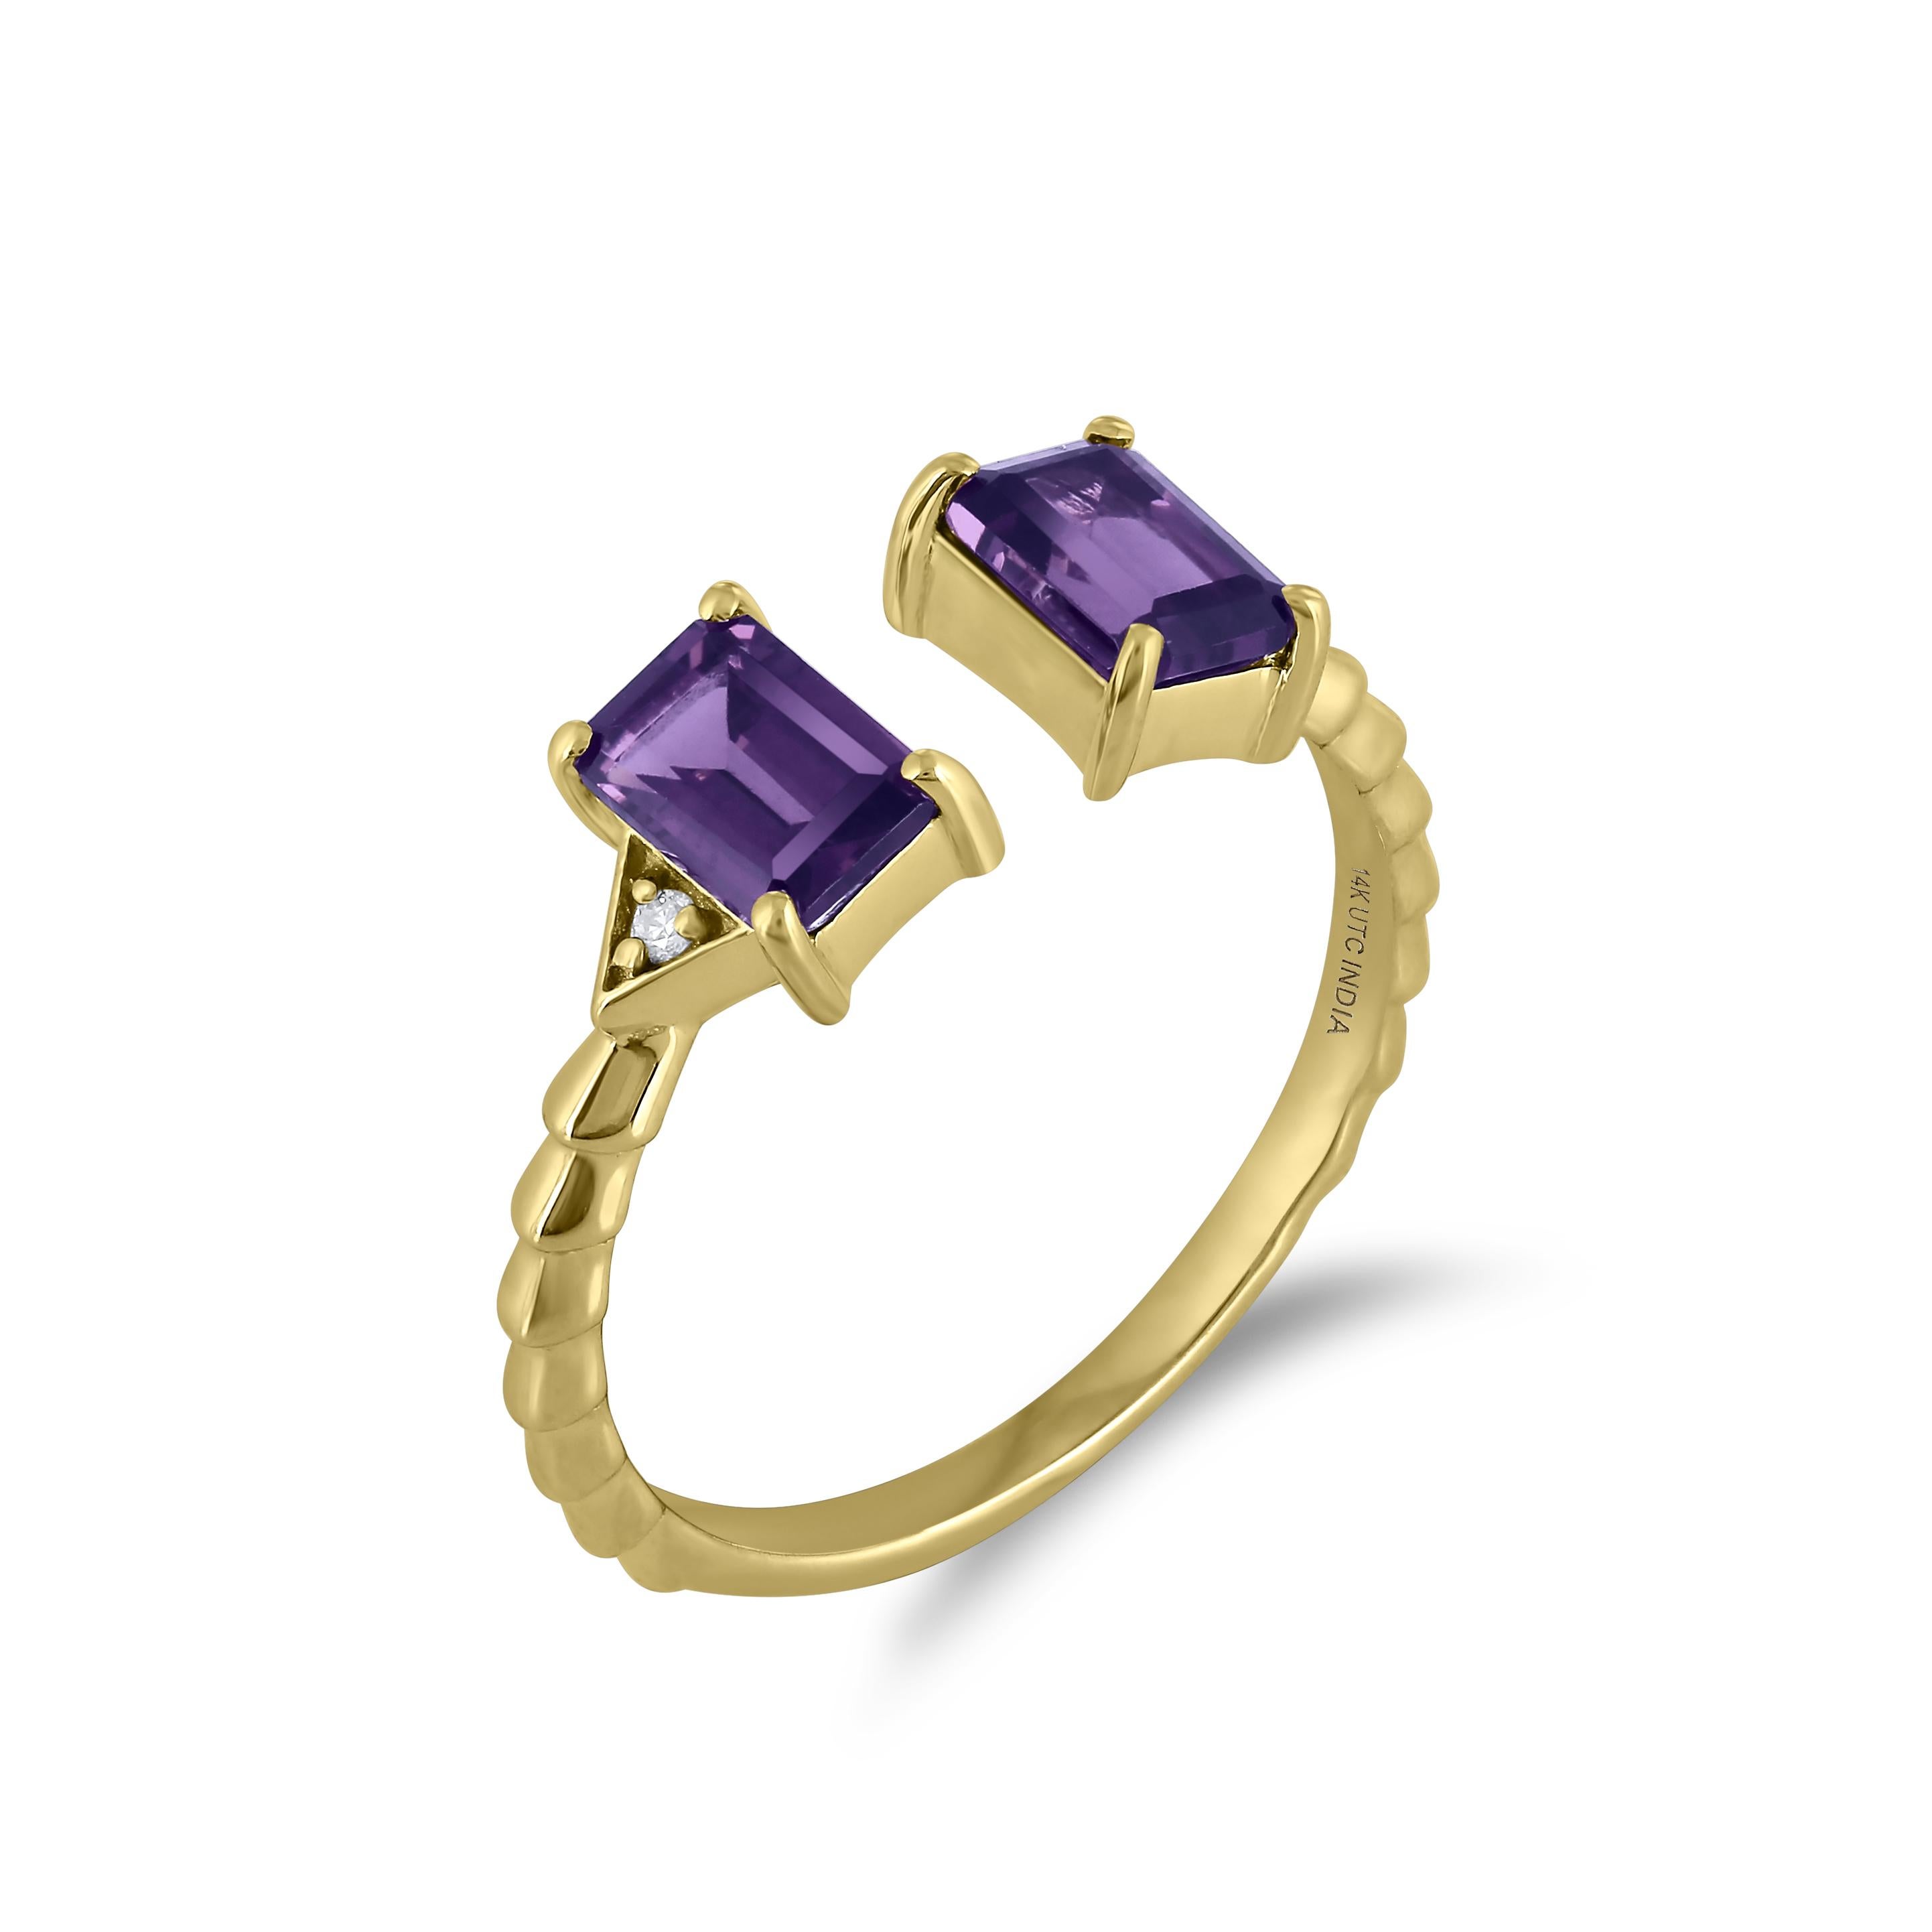 Lovingly known as the “all purpose stone”, two octagon-cut protective Amethyst stones in a prong setting are affixed on the 14K Yellow Gold cuff ring. The diamonds are I1 in clarity, and GH in color, weighing 0.021 Cts. Two round full-cut White